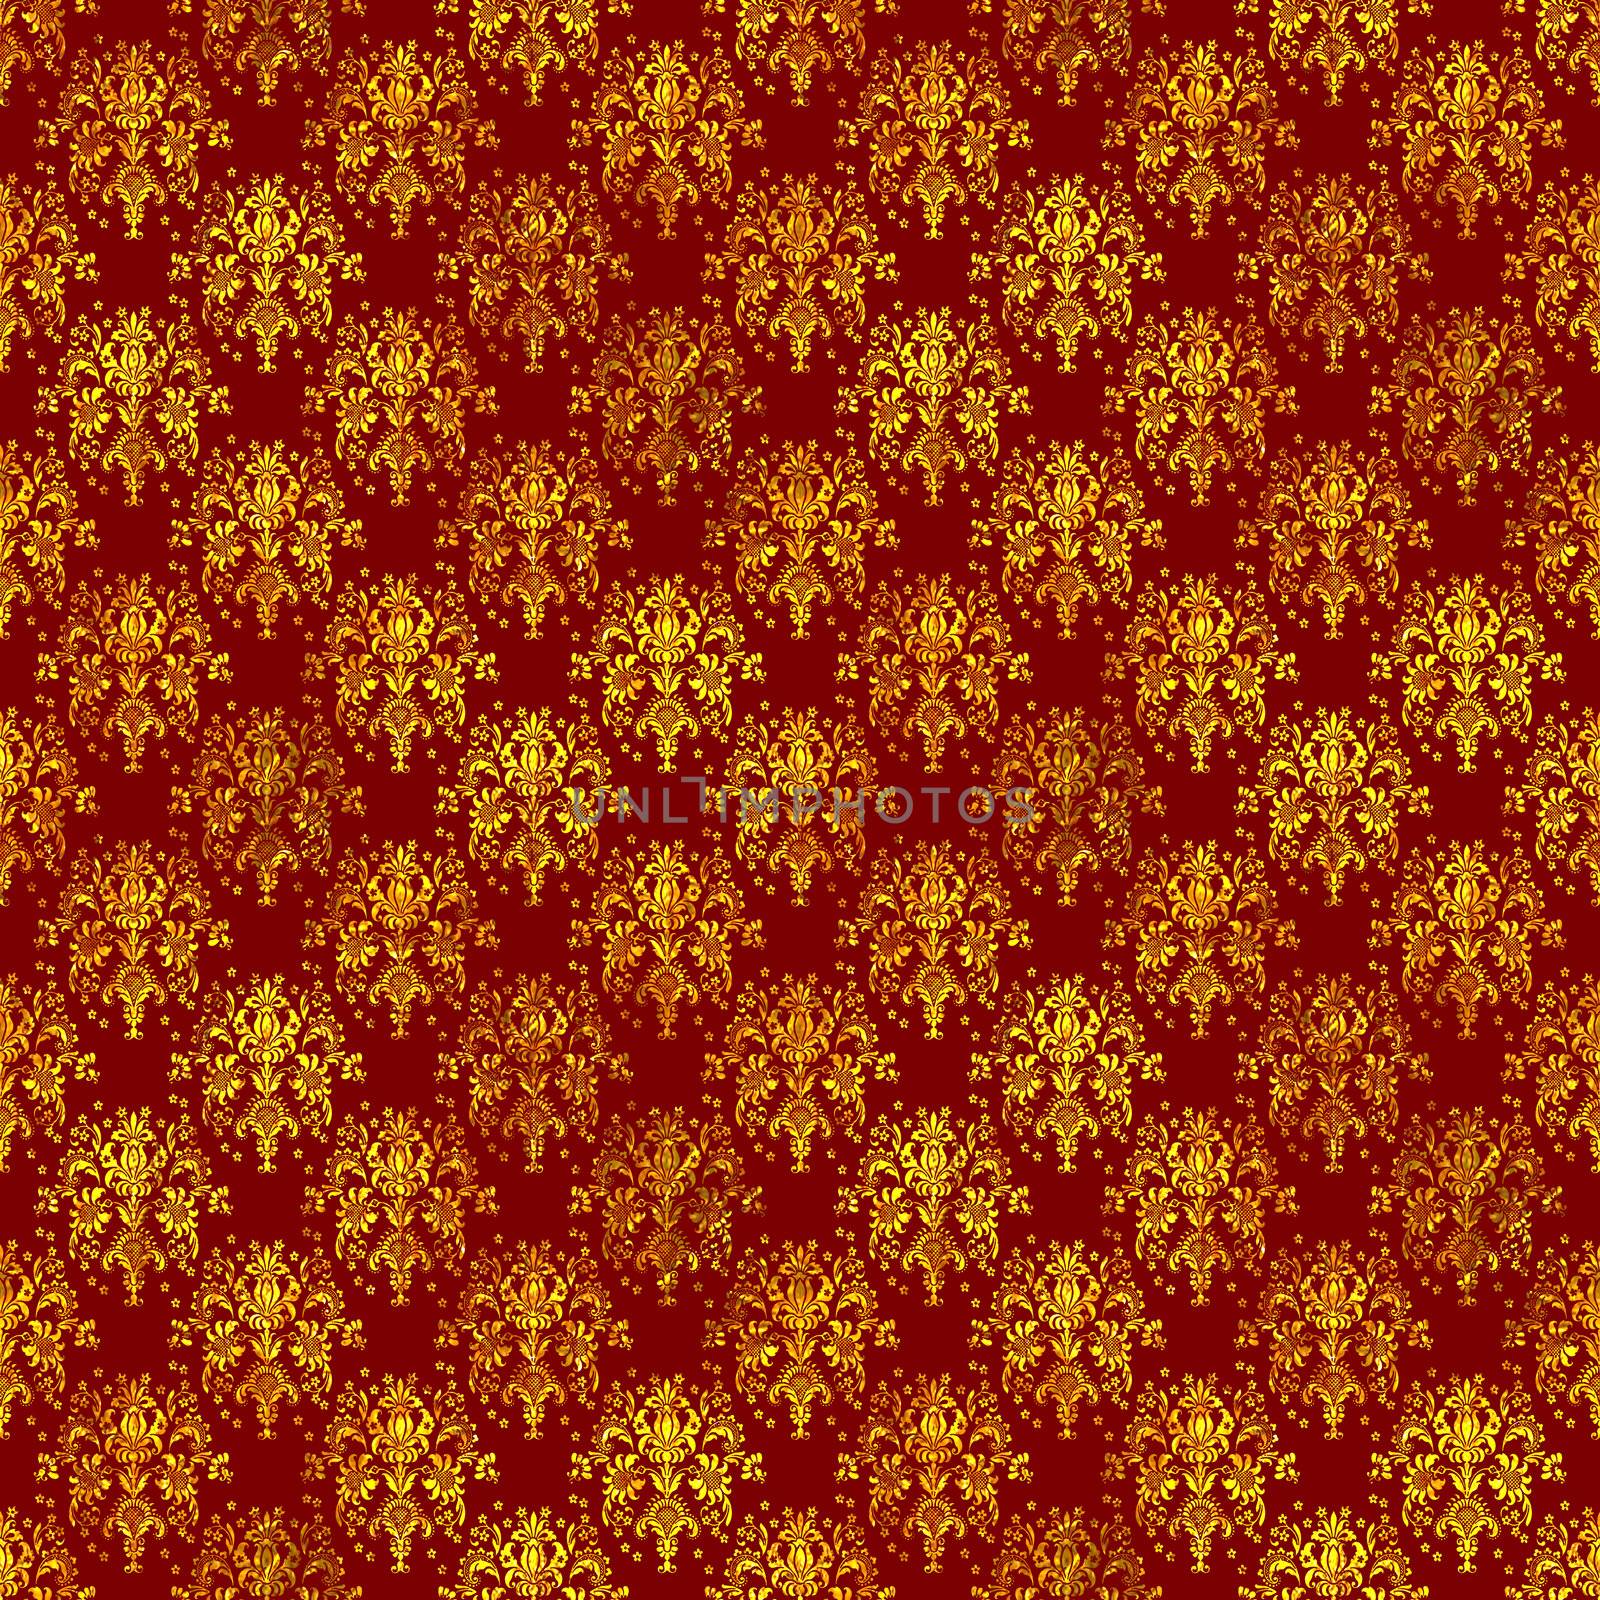 Rich Holiday Damask by SongPixels